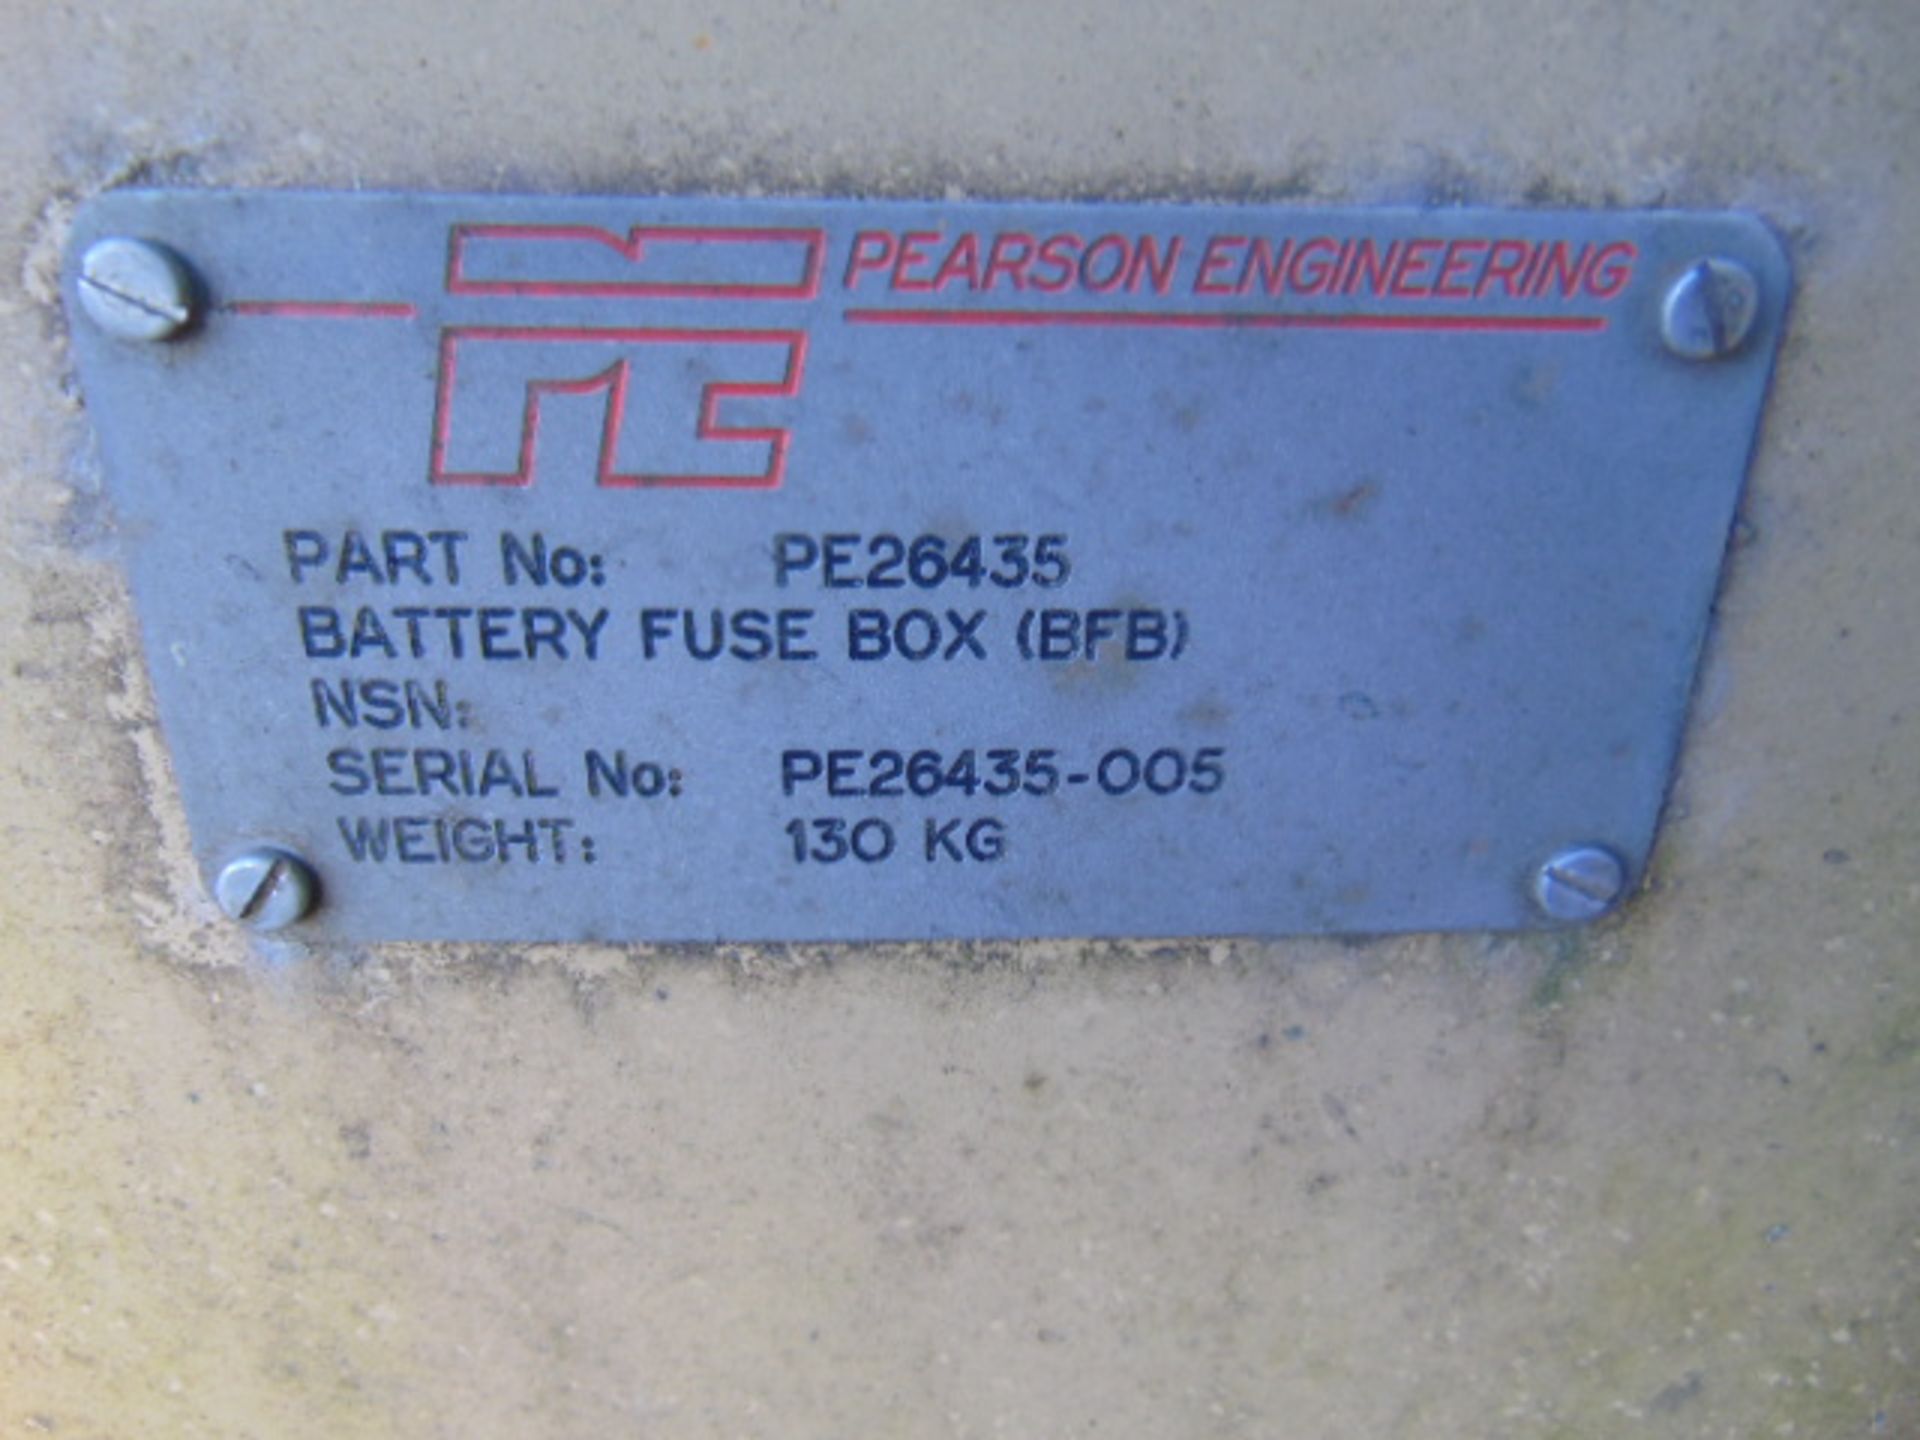 Qty 2 x Pearson Engineering Battery Fuse Boxes Part No PE26435 - Image 7 of 7